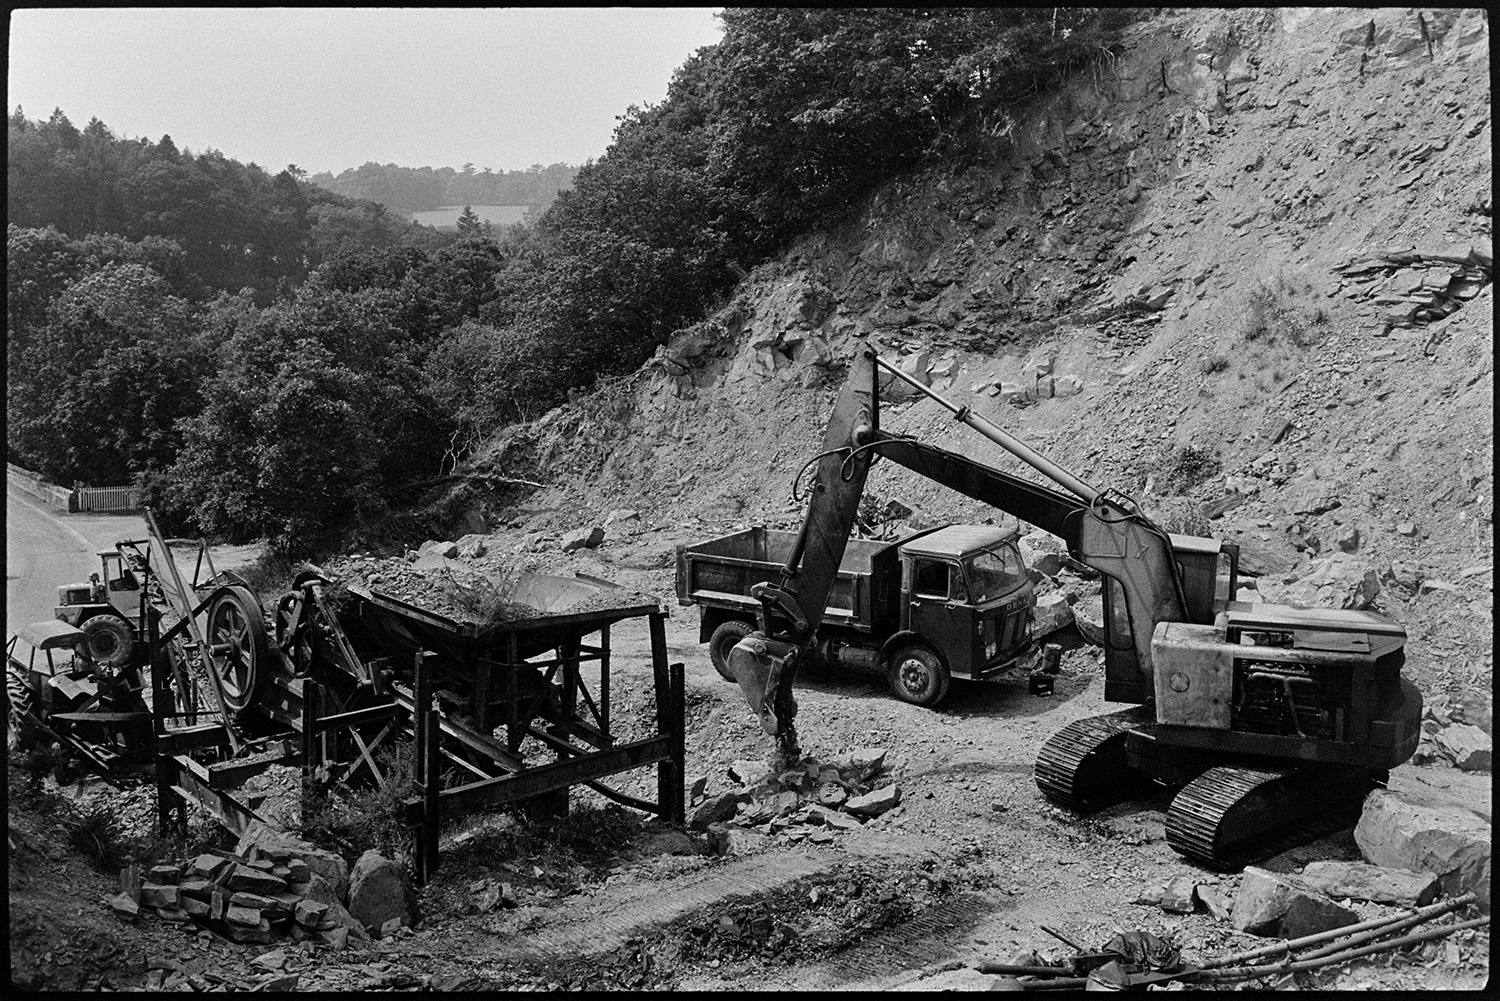 Excavator, crusher and abandoned bulldozer in quarry. Man at controls of excavator. 
[A digger, truck, crusher and other machinery at New Bridge Quarry, Dolton. Woodland can be seen in the background.]